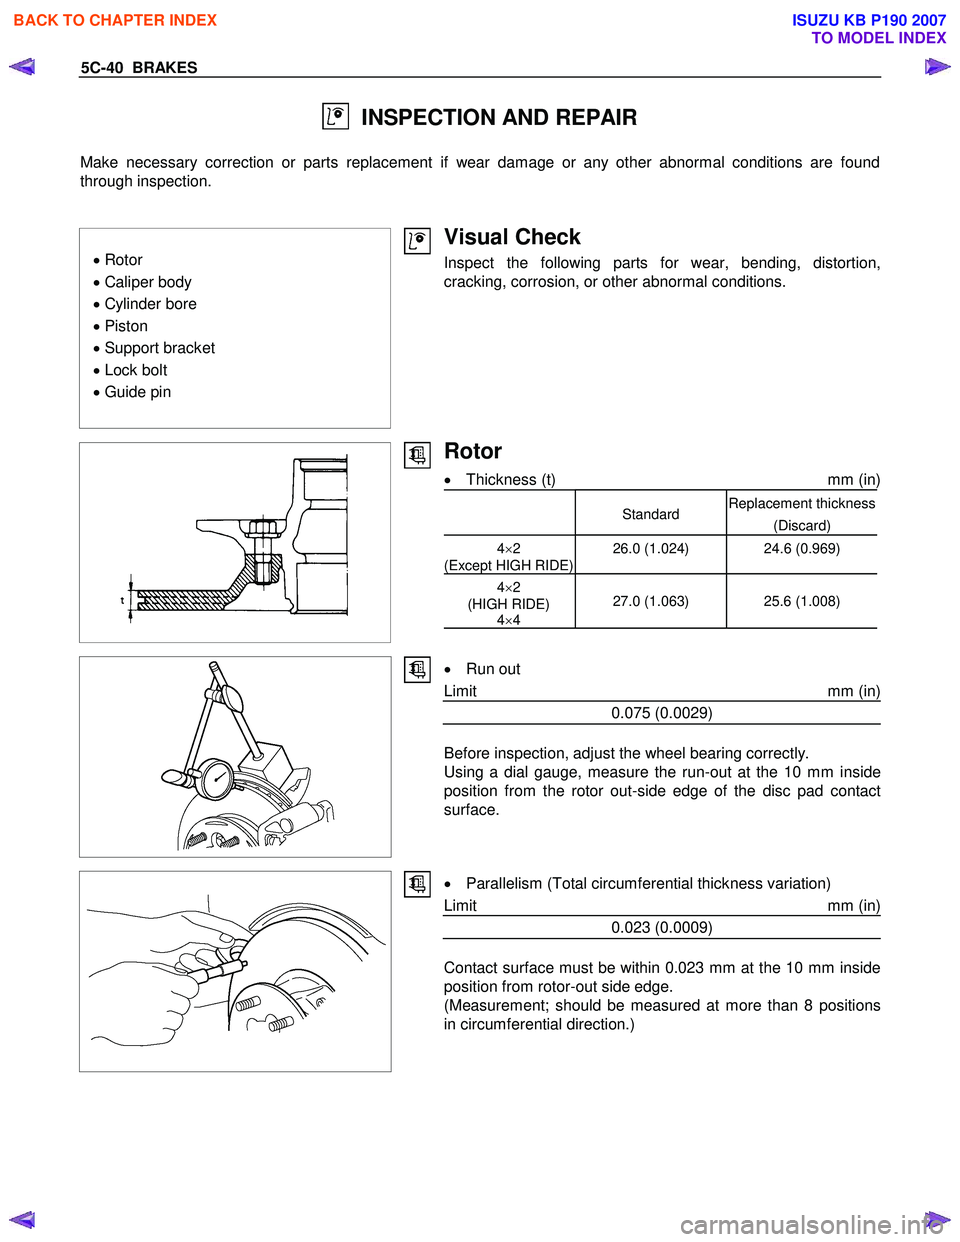 ISUZU KB P190 2007  Workshop Owners Guide 5C-40  BRAKES 
  INSPECTION AND REPAIR 
  
Make necessary correction or parts replacement if wear damage or any other abnormal conditions are found 
through inspection. 
 
 
 
•  Rotor  
•  Calipe